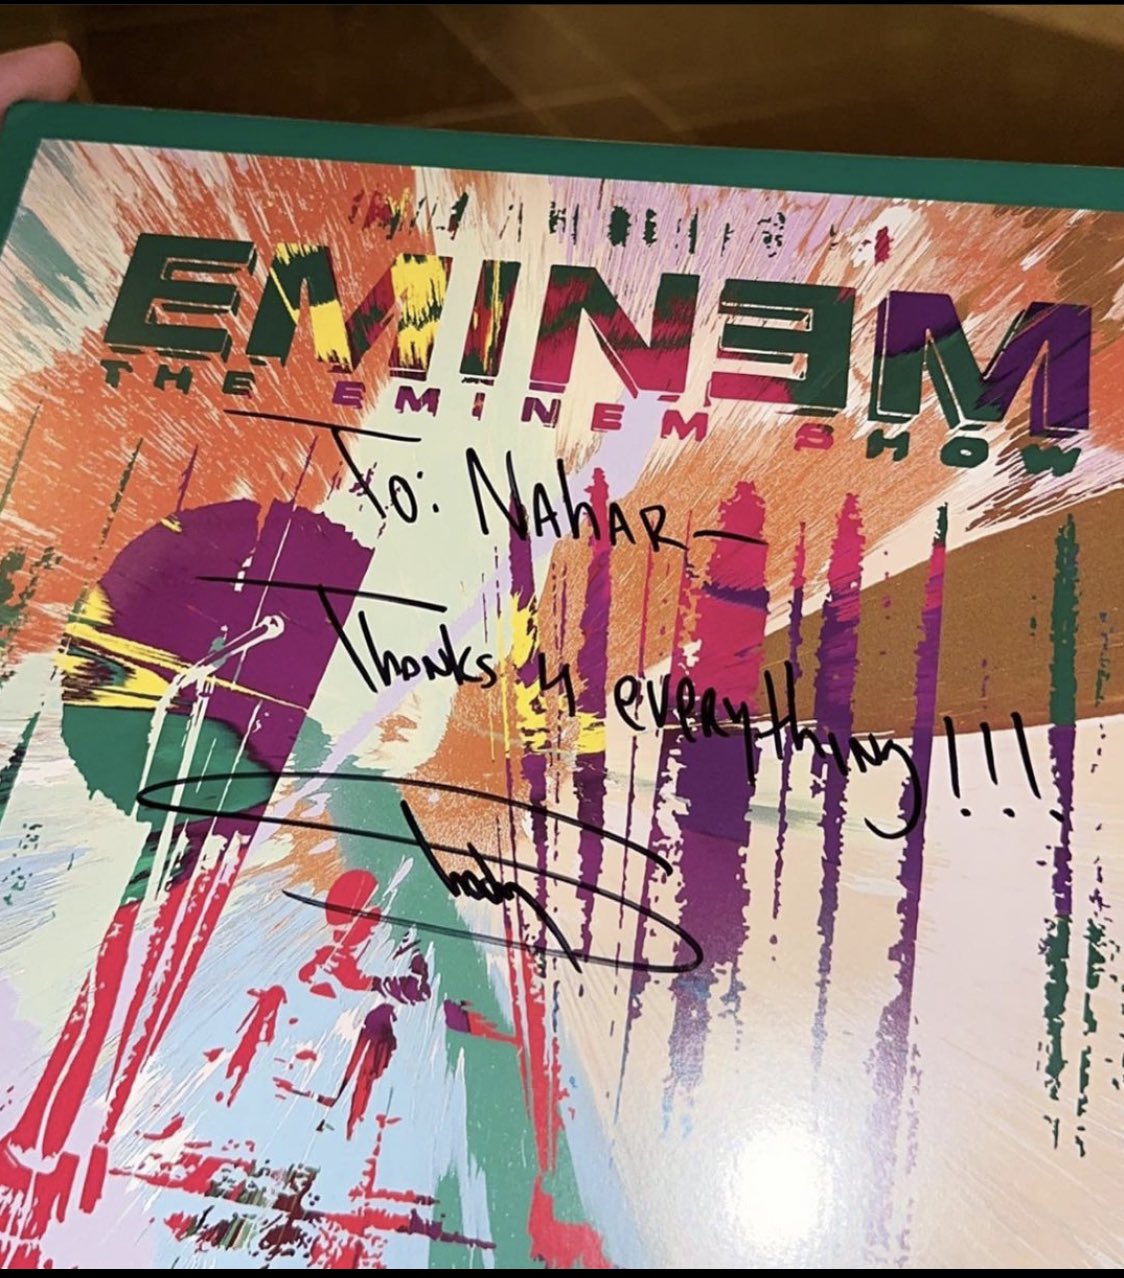 Nahar got a picture and an autograph by Eminem. Limited edition version of The Eminem Show vinyl with cover by Damien Hirst (1/100), custom packaging was designed by GUCCI